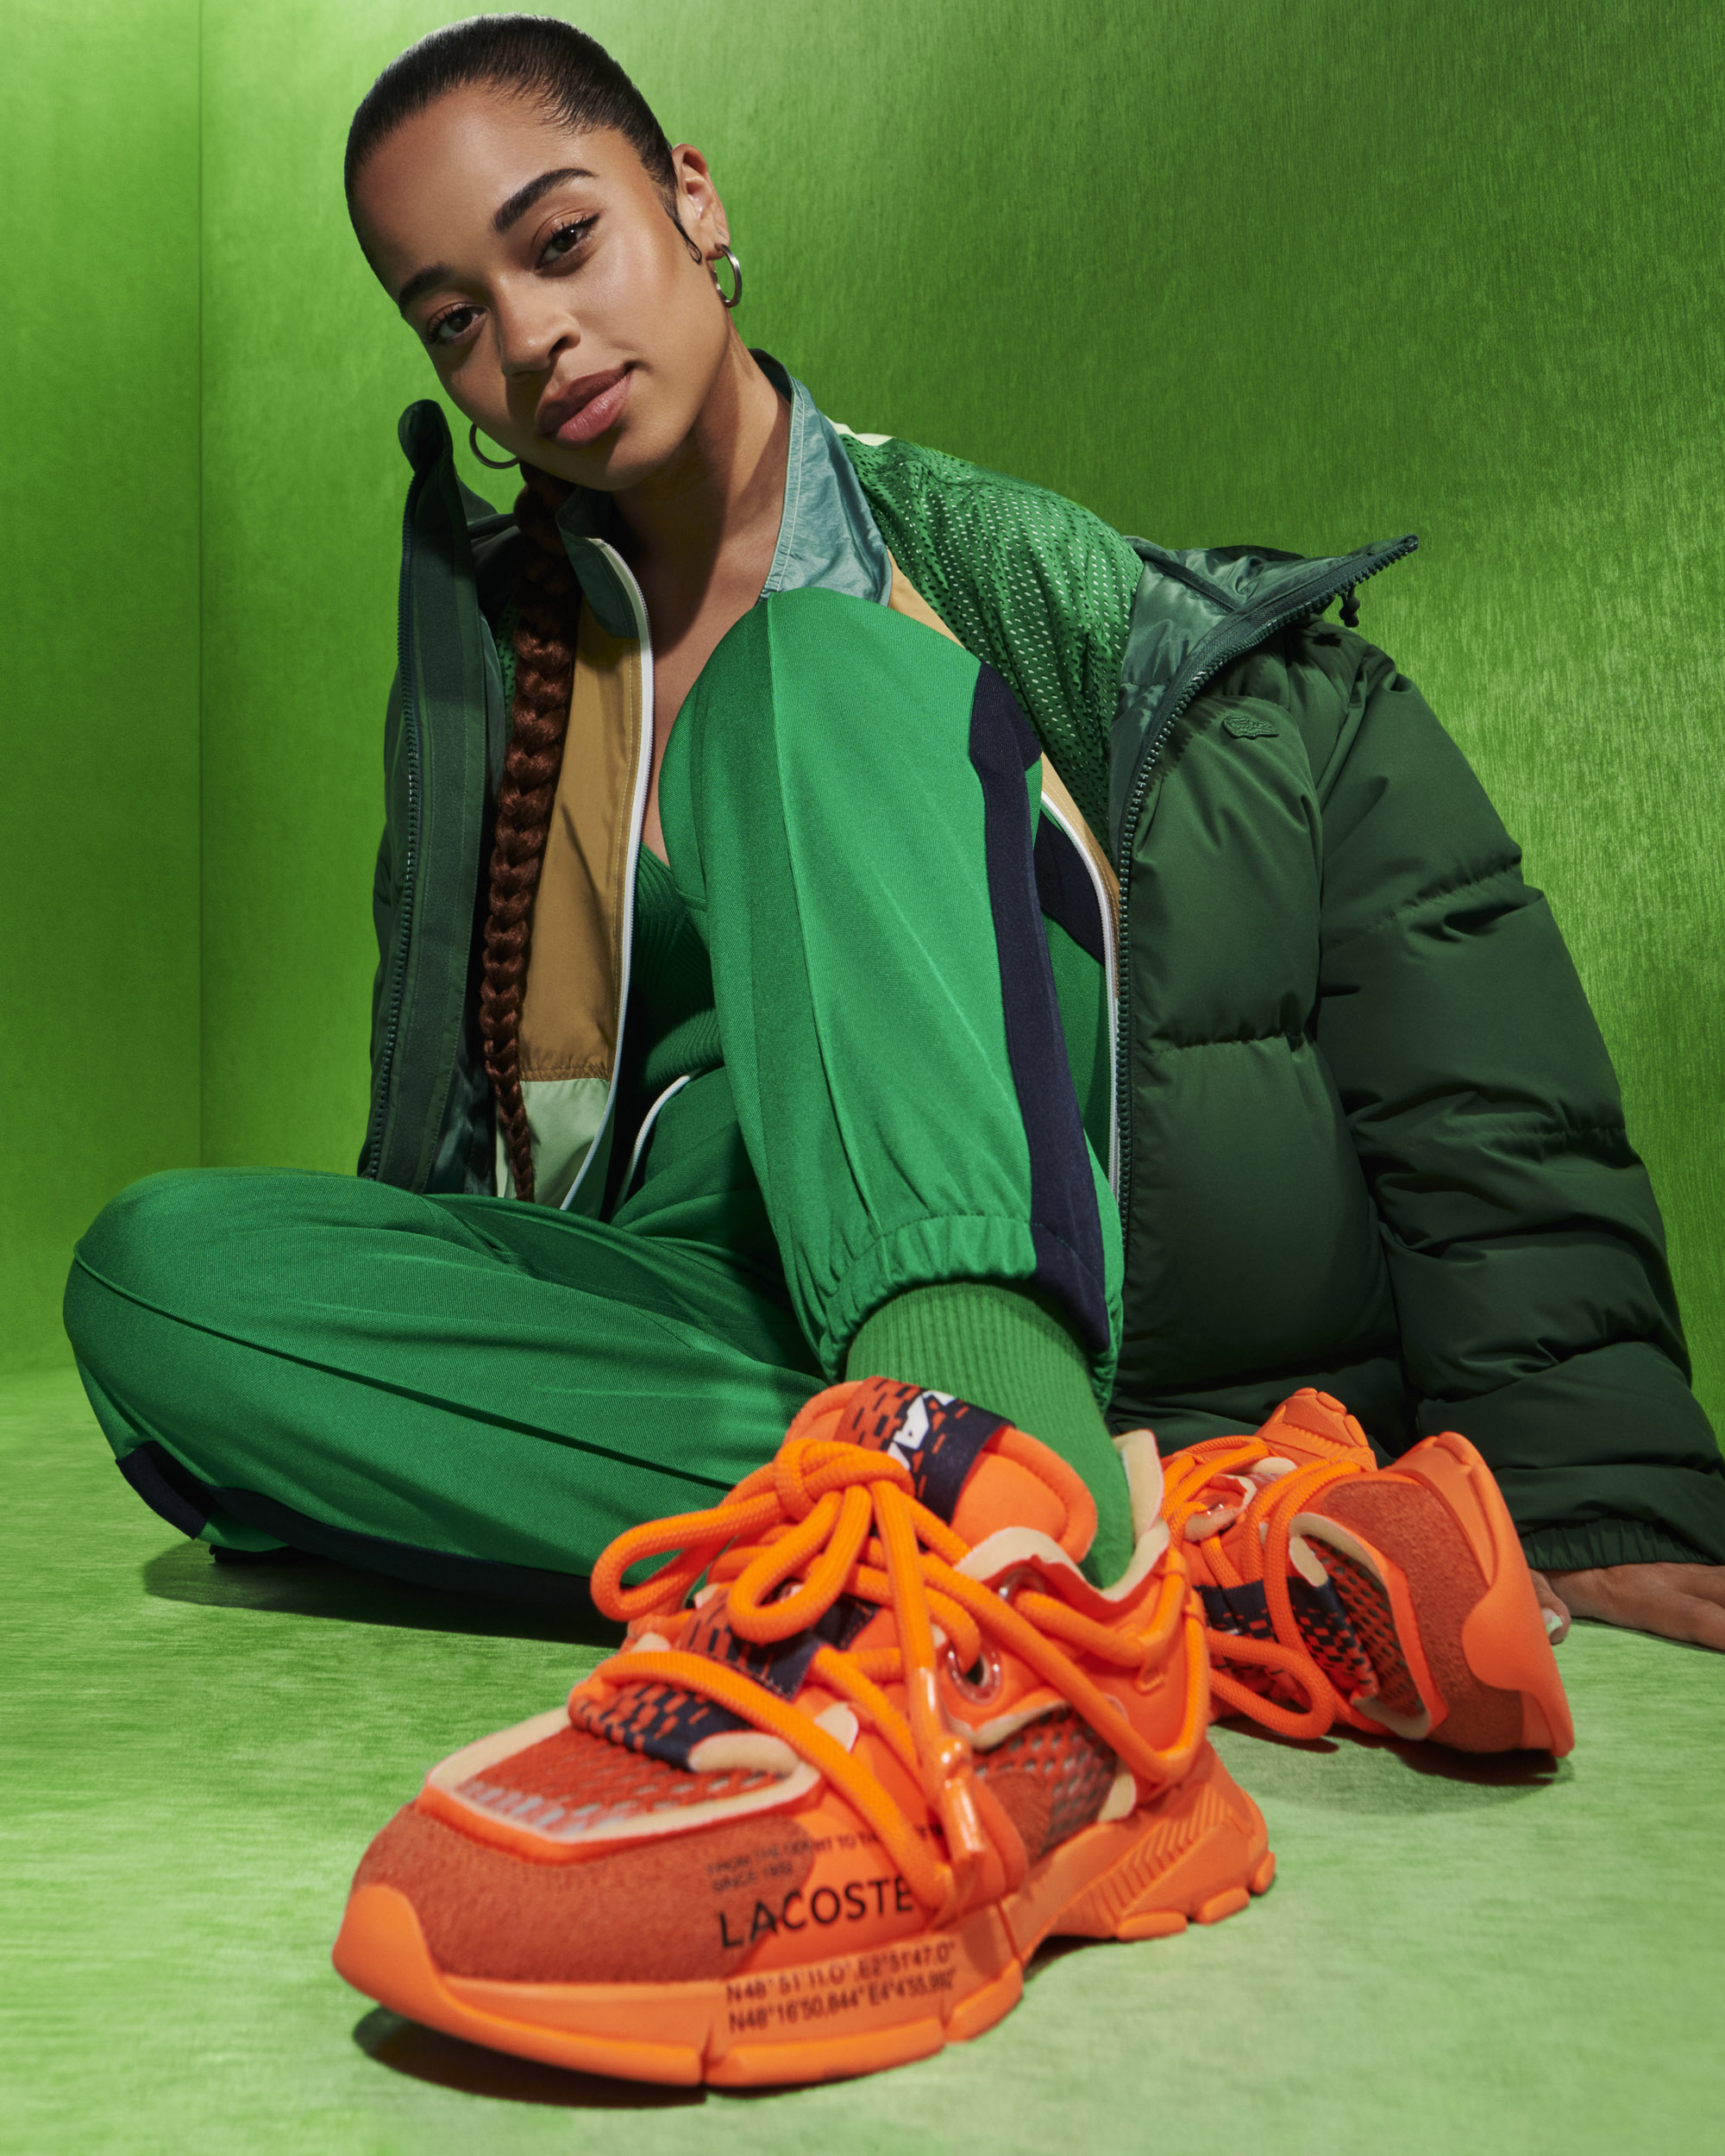 Lacoste Paves a New Path for Its Footwear Legacy